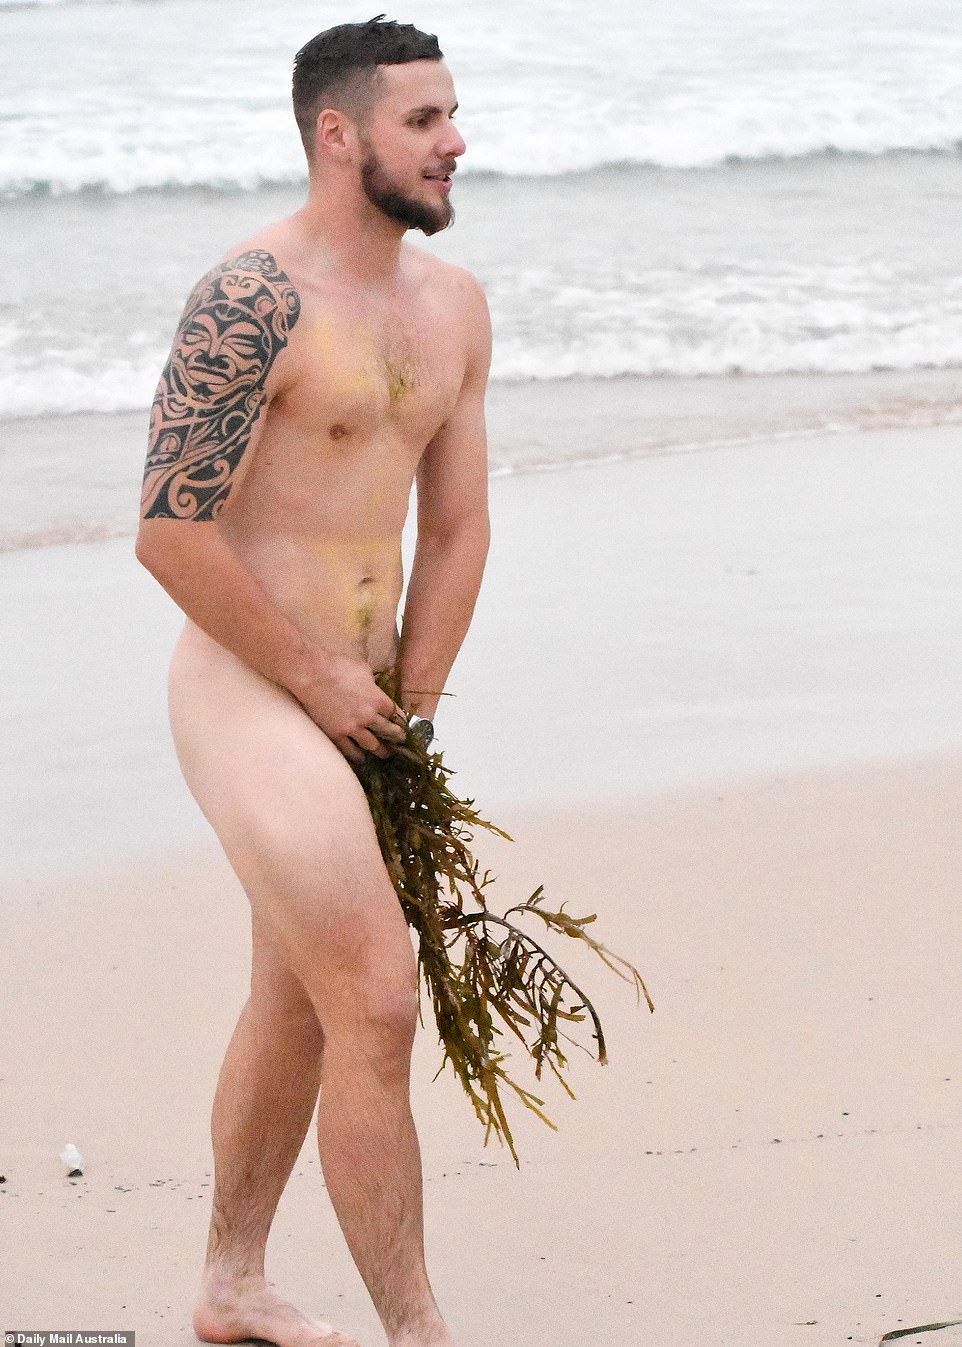 A man covers his modesty with seaweed after stripping down to his birthday suit for a refreshing dip at Bondi Beach